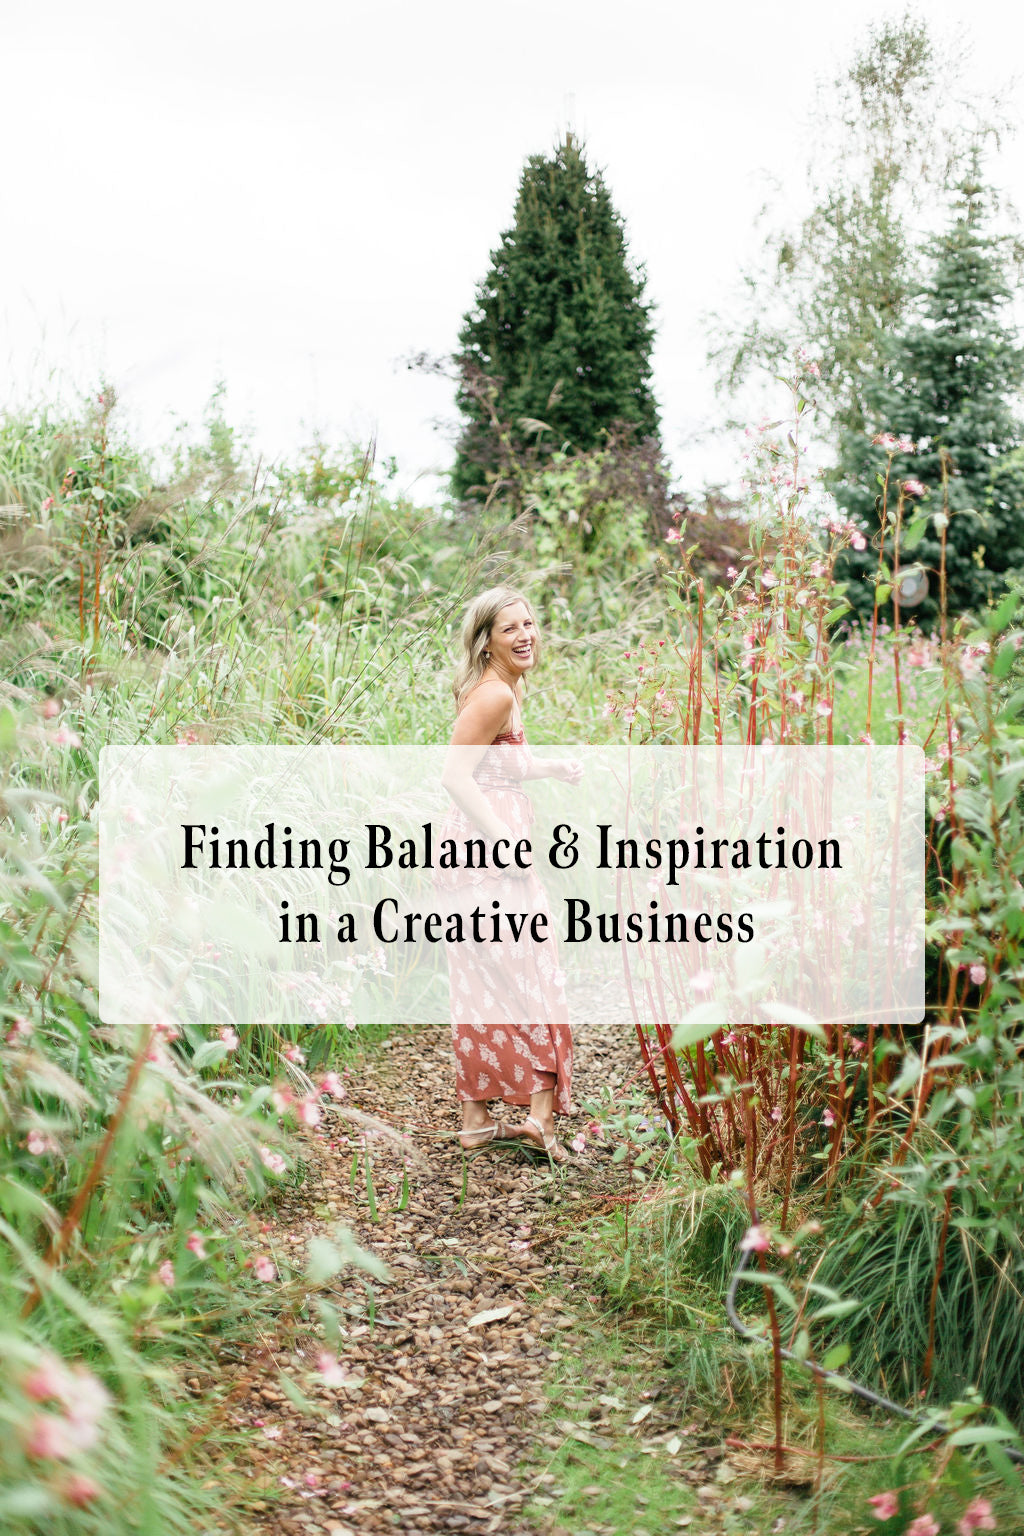 5 Ways to Find Balance and Inspiration In a Creative Business